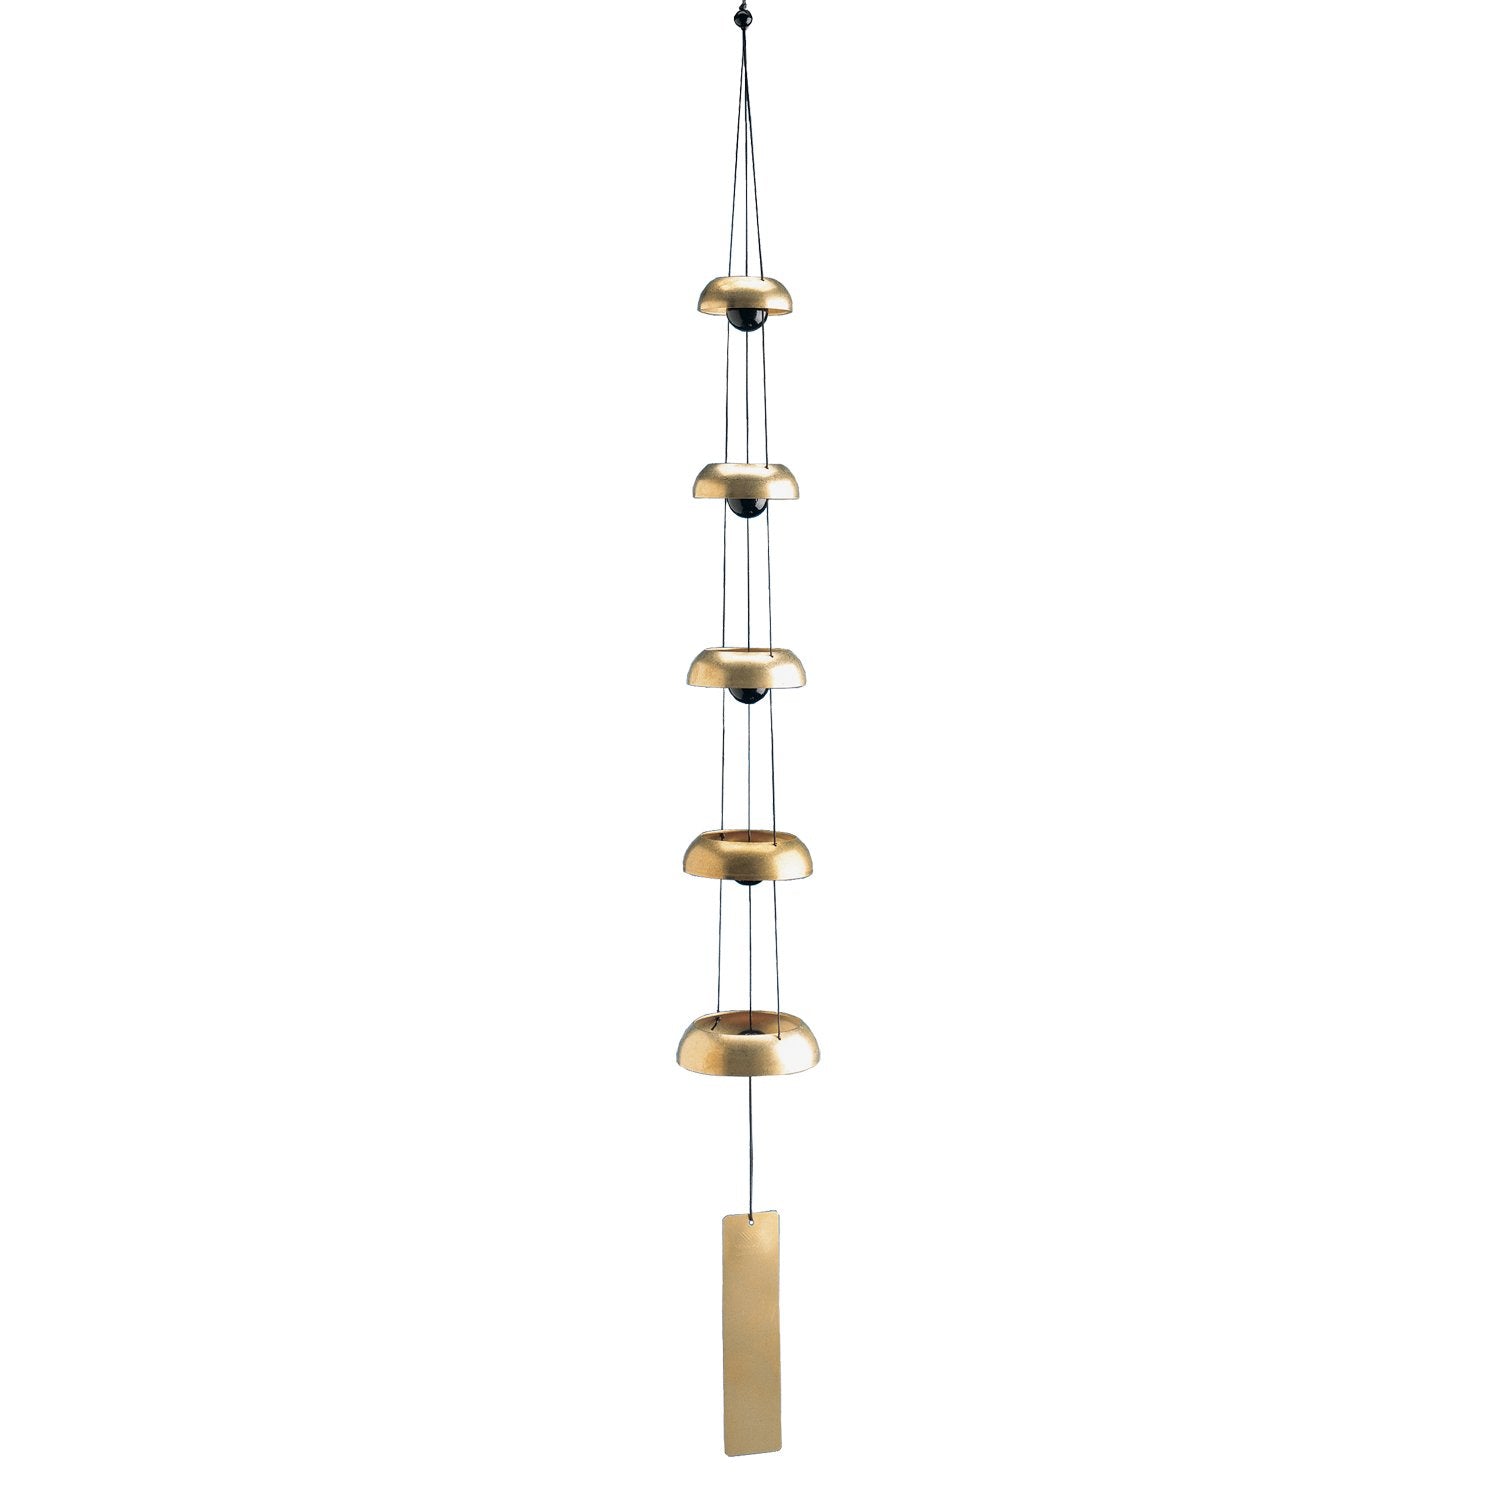 Temple Bells - Quintet, Brass full product image